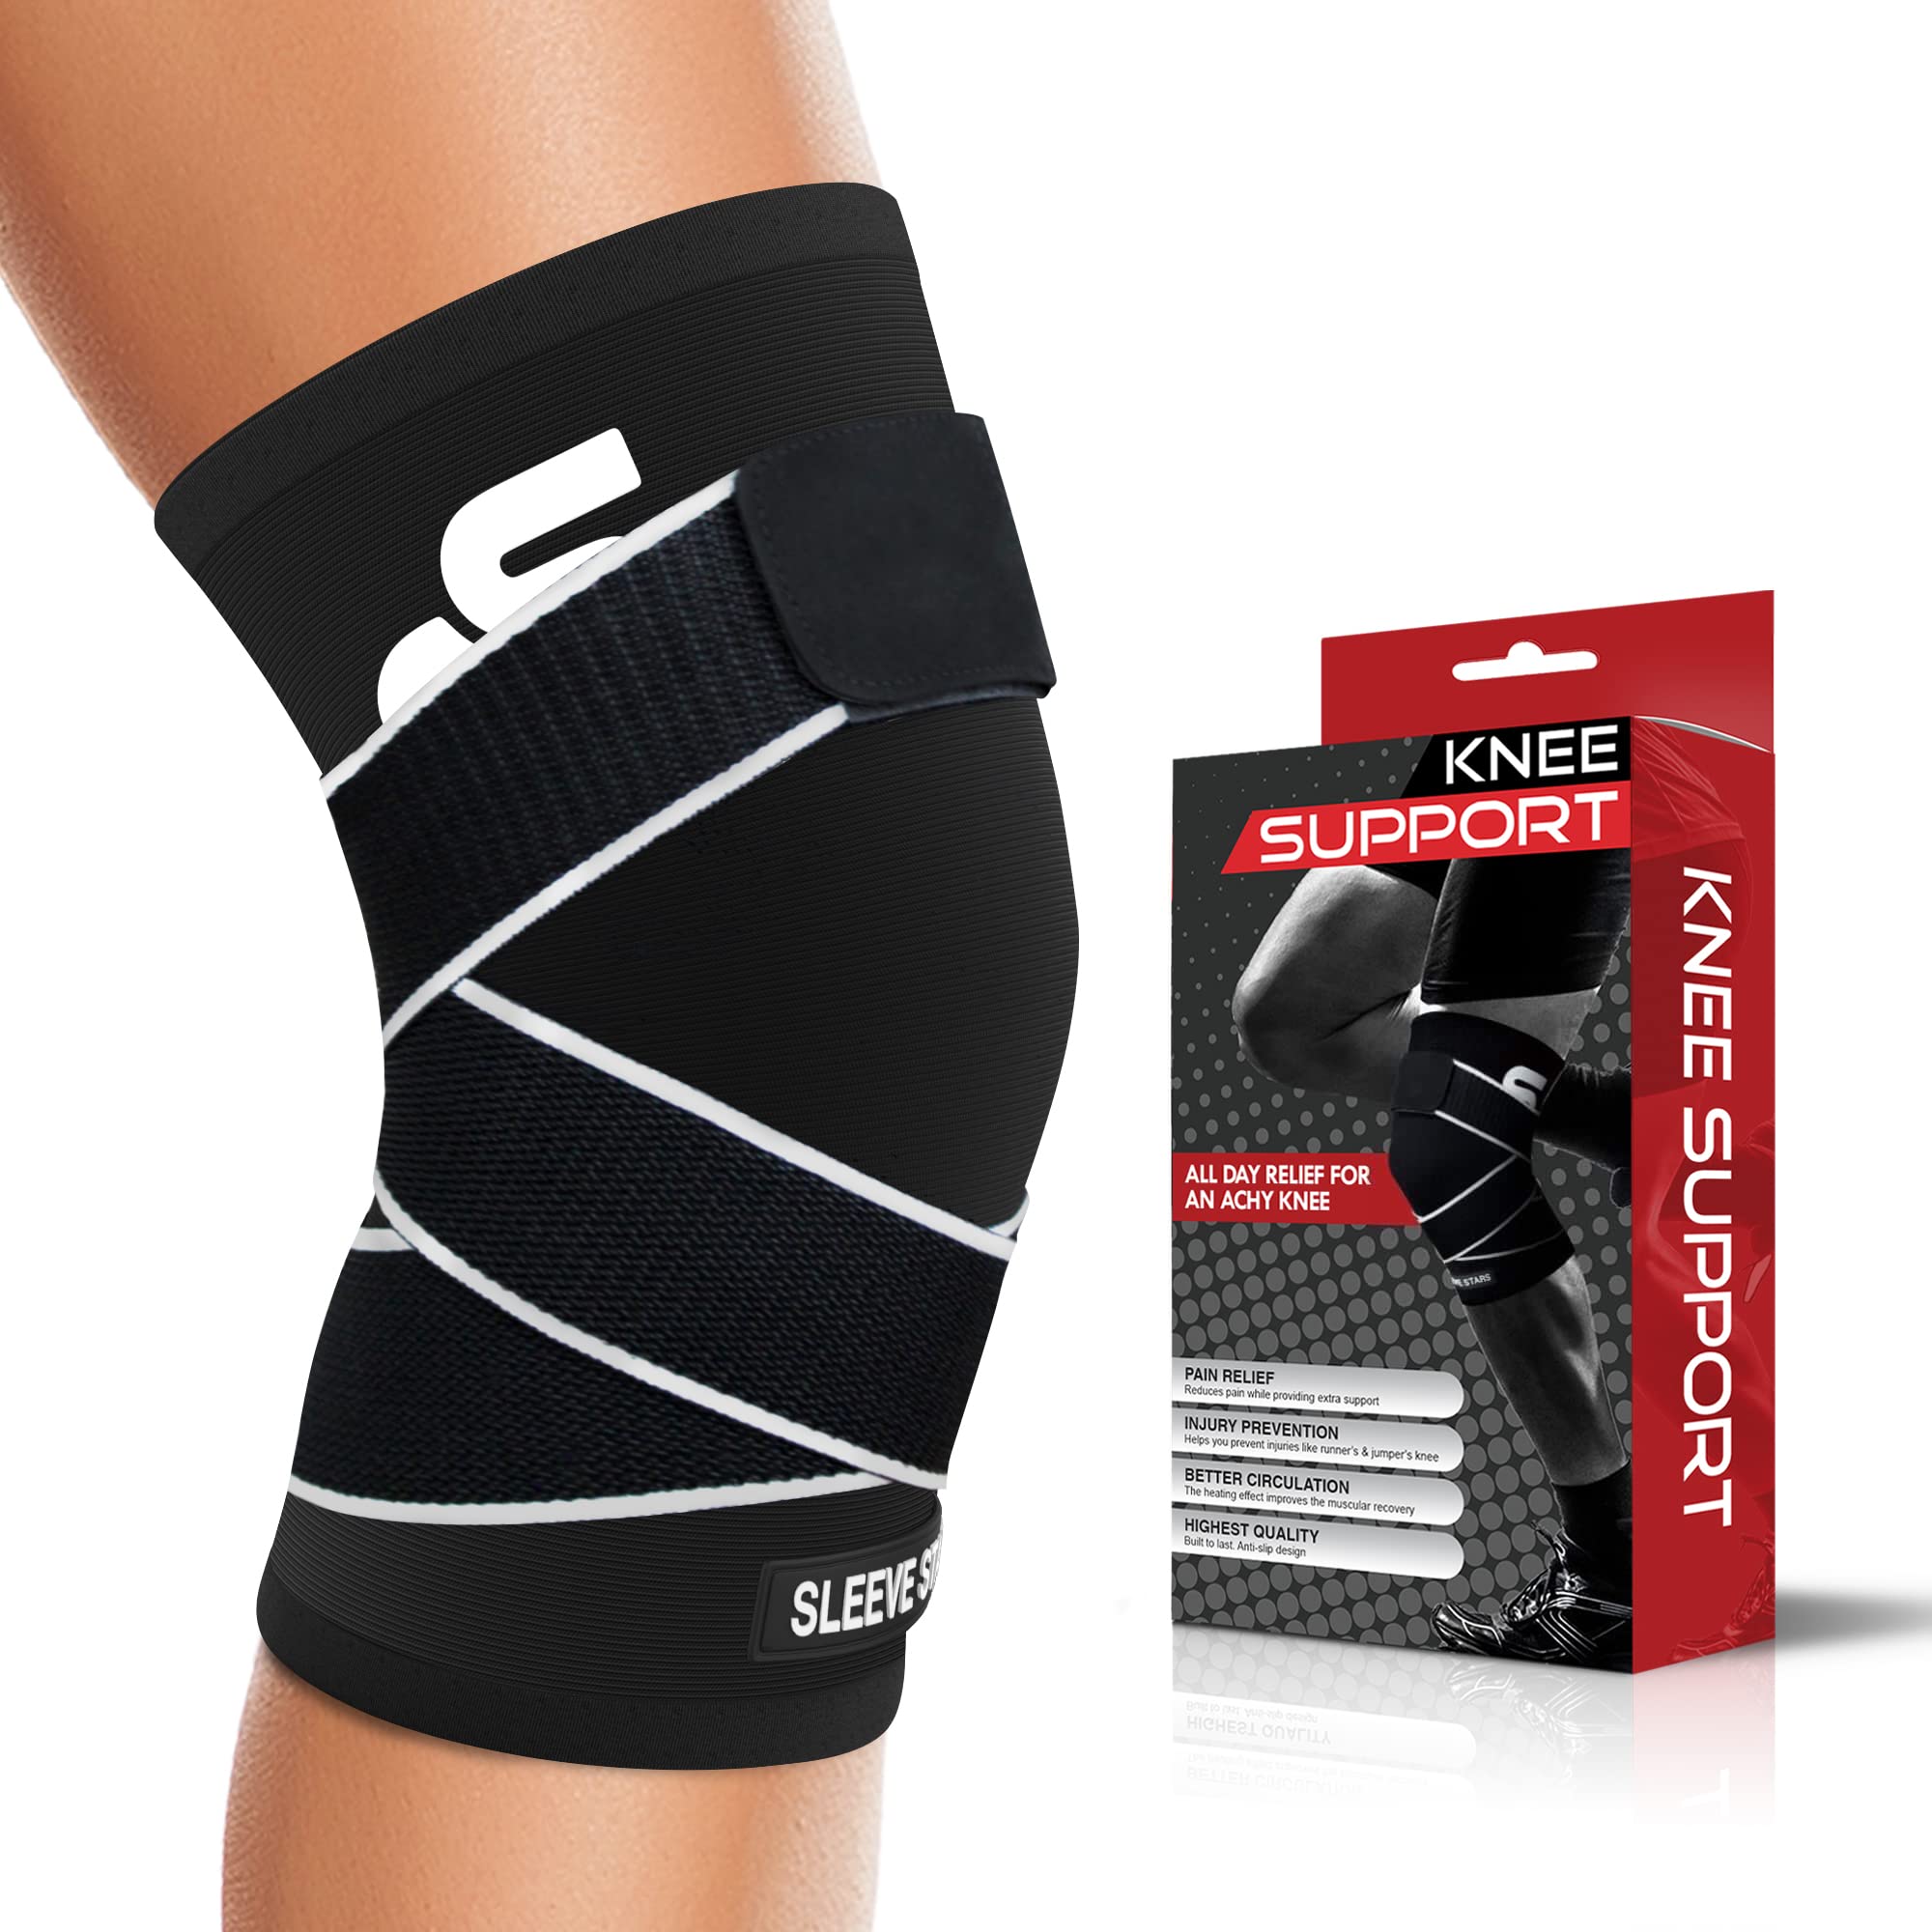 Sleeve Stars Knee Compression Sleeve for Women & Men, Swedish Design Knee Brace for Meniscus Tear, Knee Support Wrap for Working Out w/Strap for Tendon & Patella, Knee Braces for Knee Pain (S-XXL)